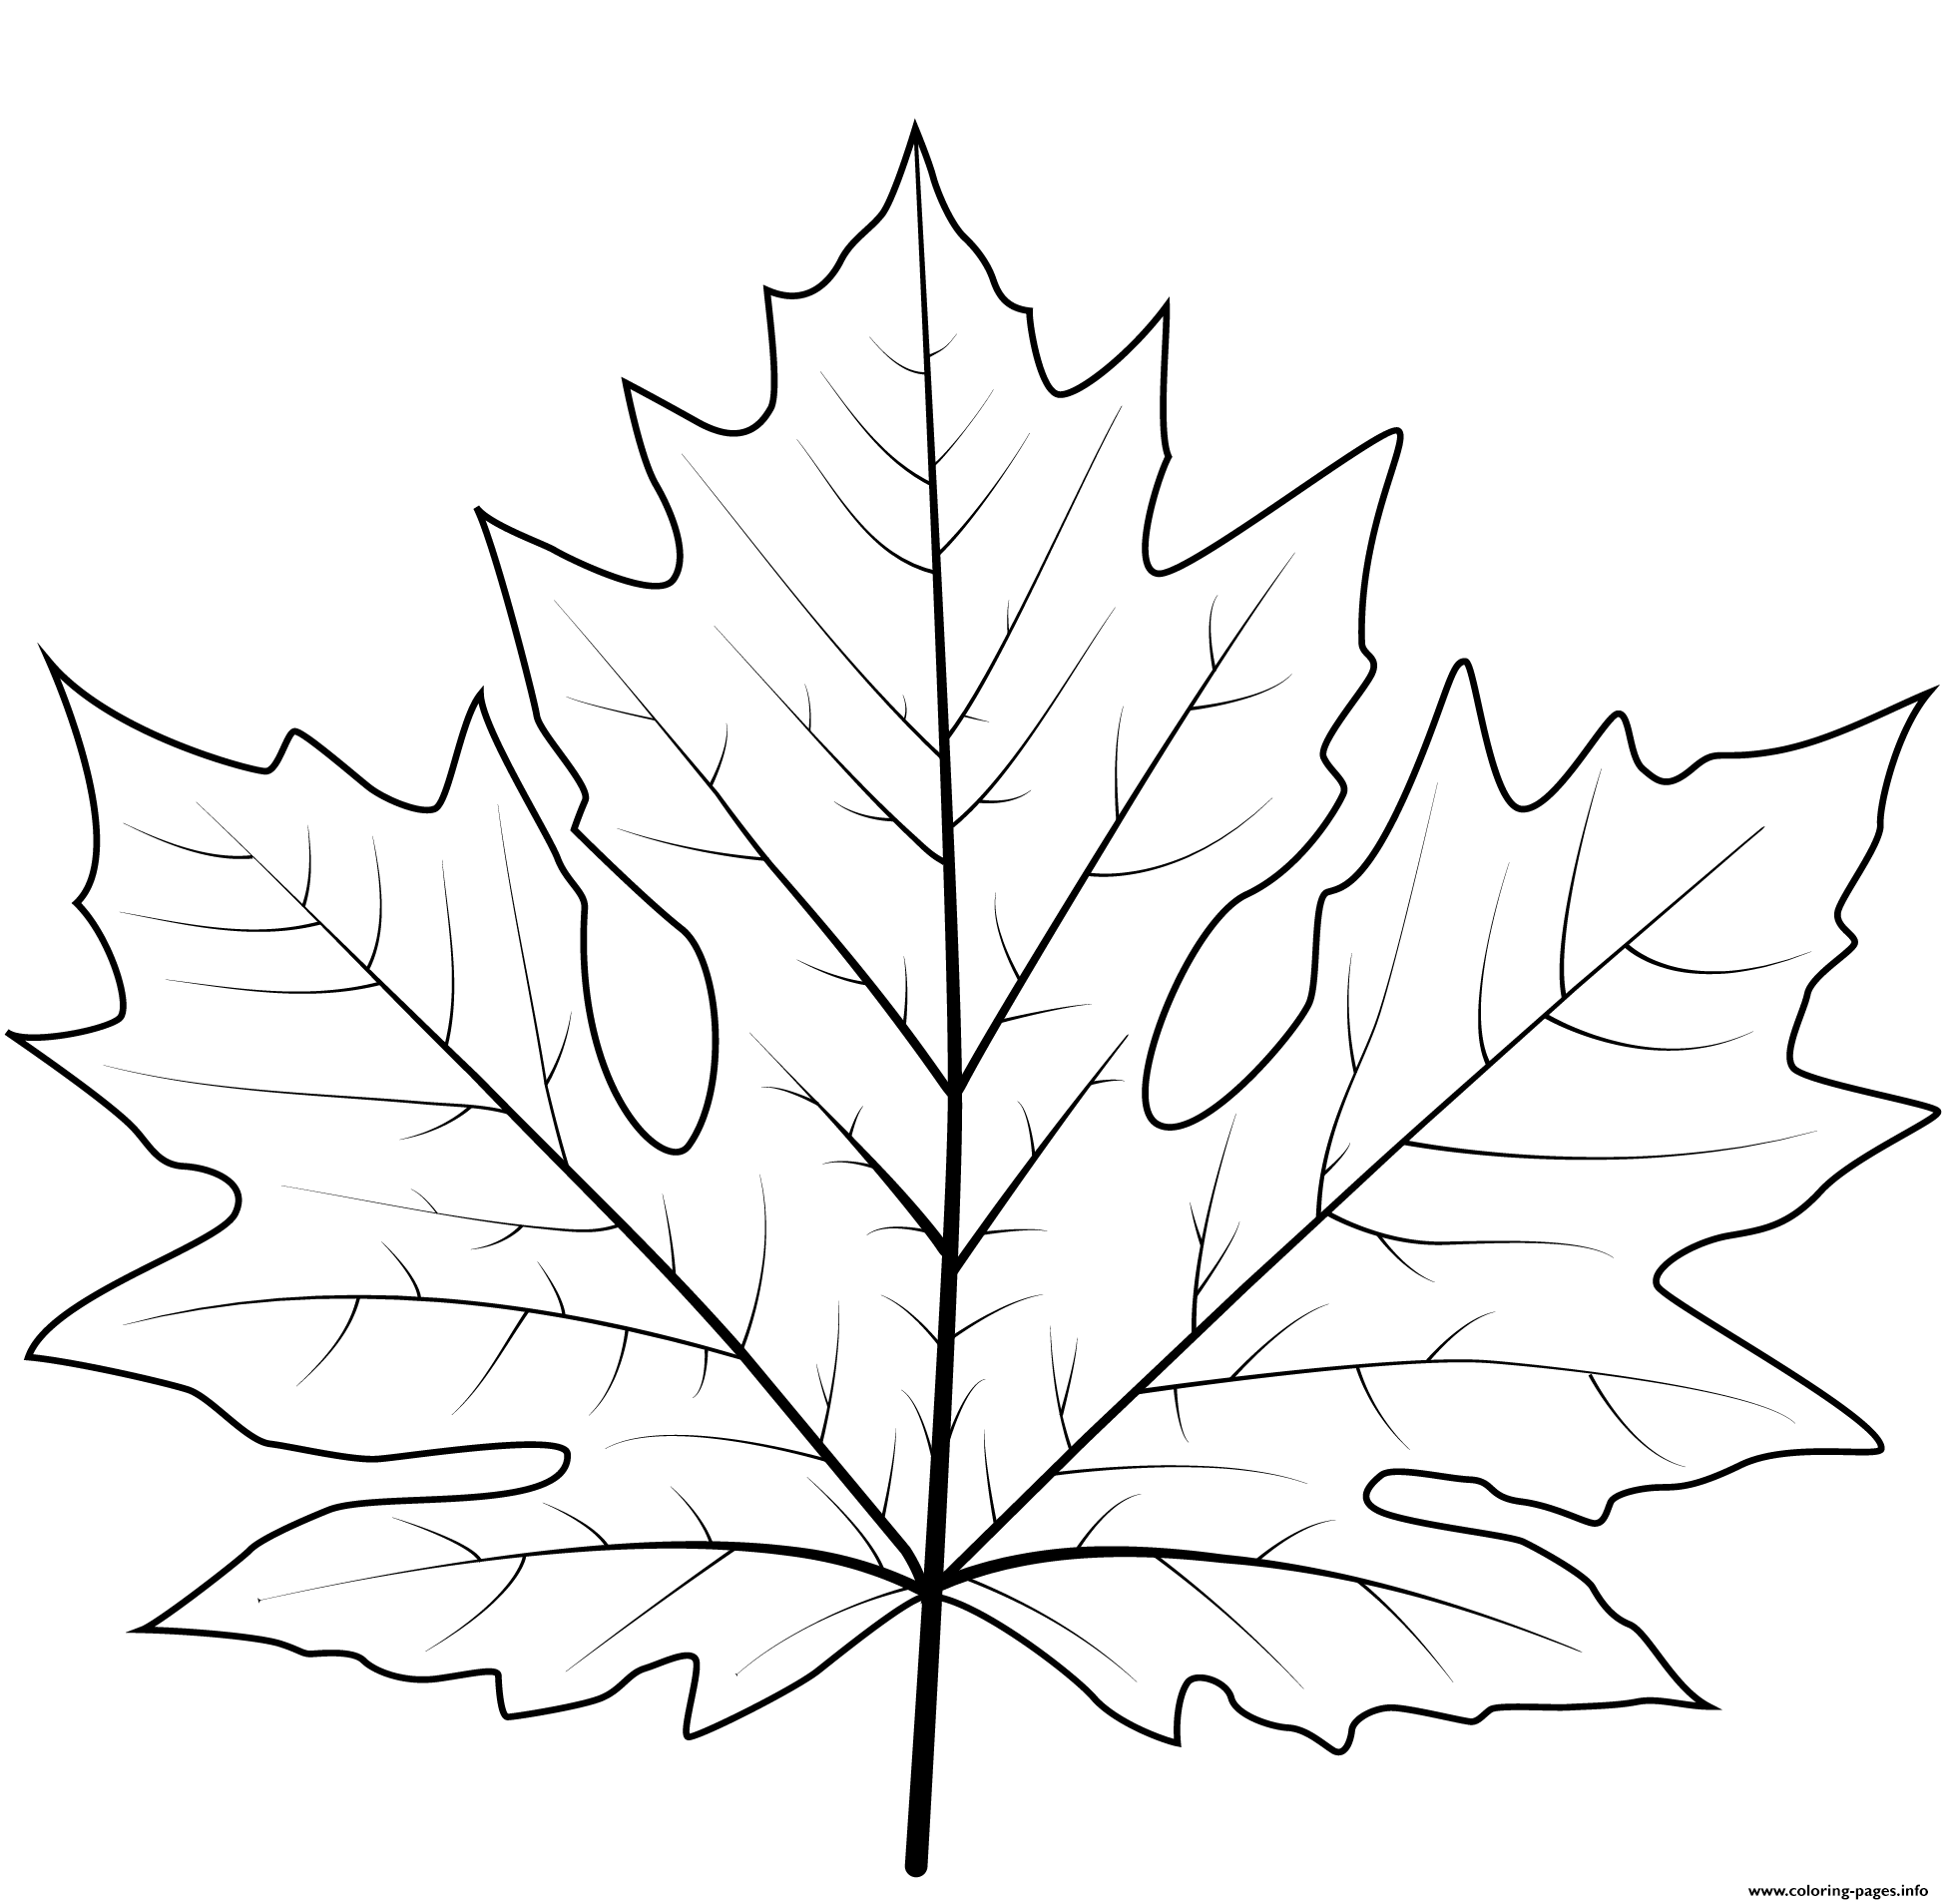 large-maple-leaf-coloring-page-free-download-gmbar-co